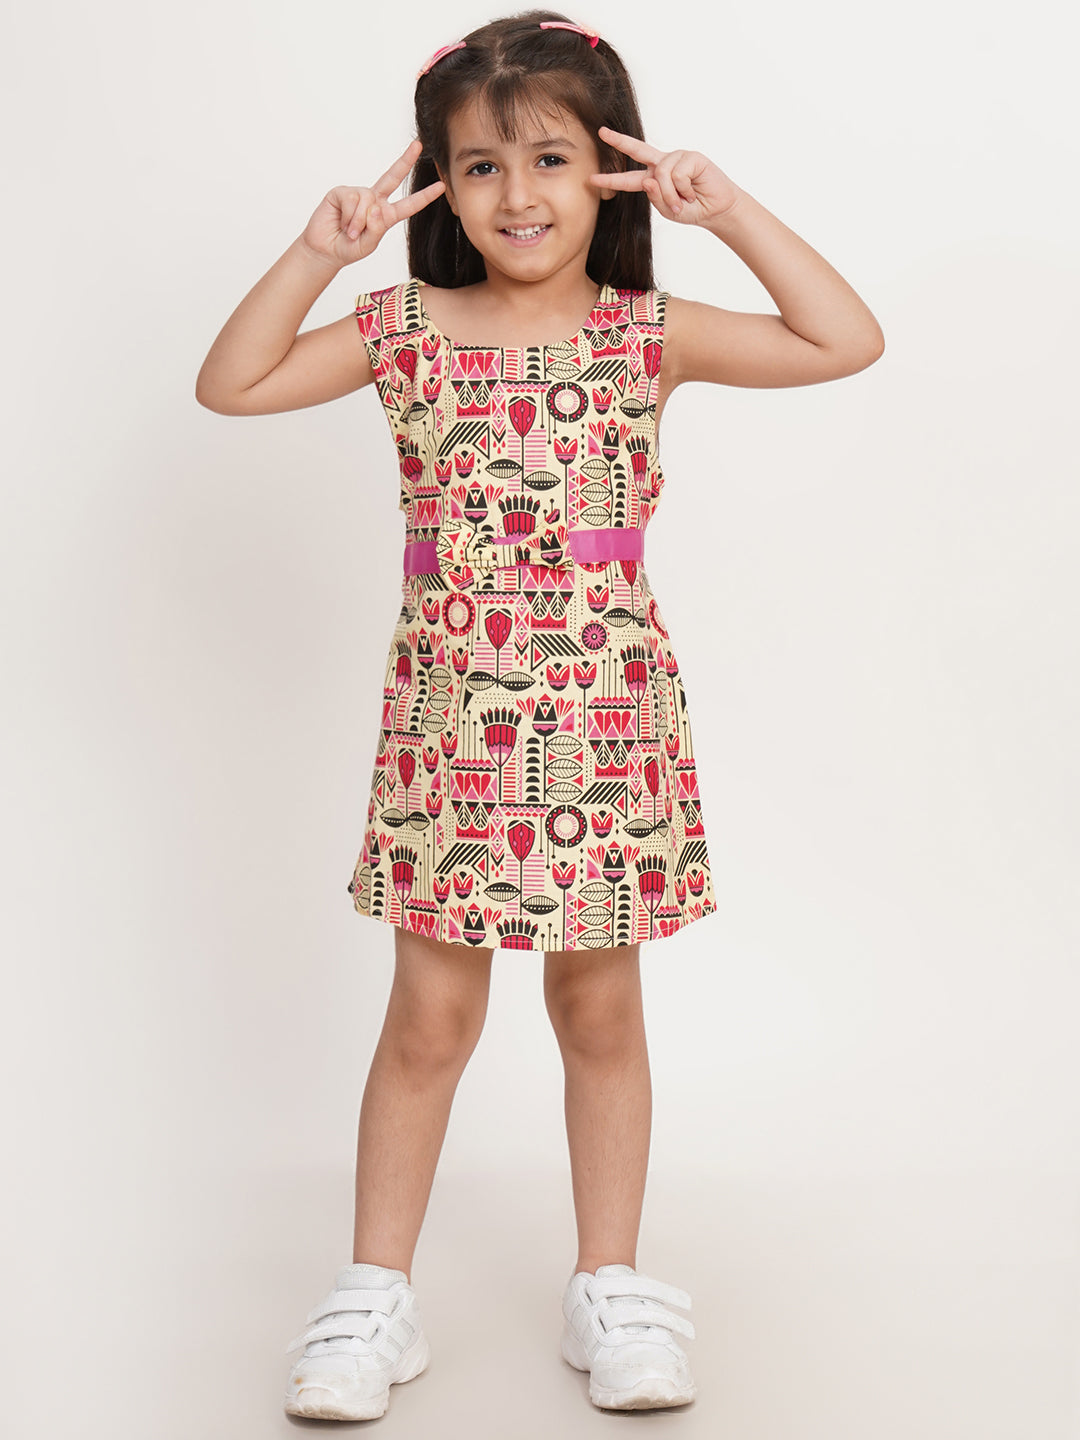 CREATIVE KID'S Girl Pink & Red Printed Cotton A-Line Dress